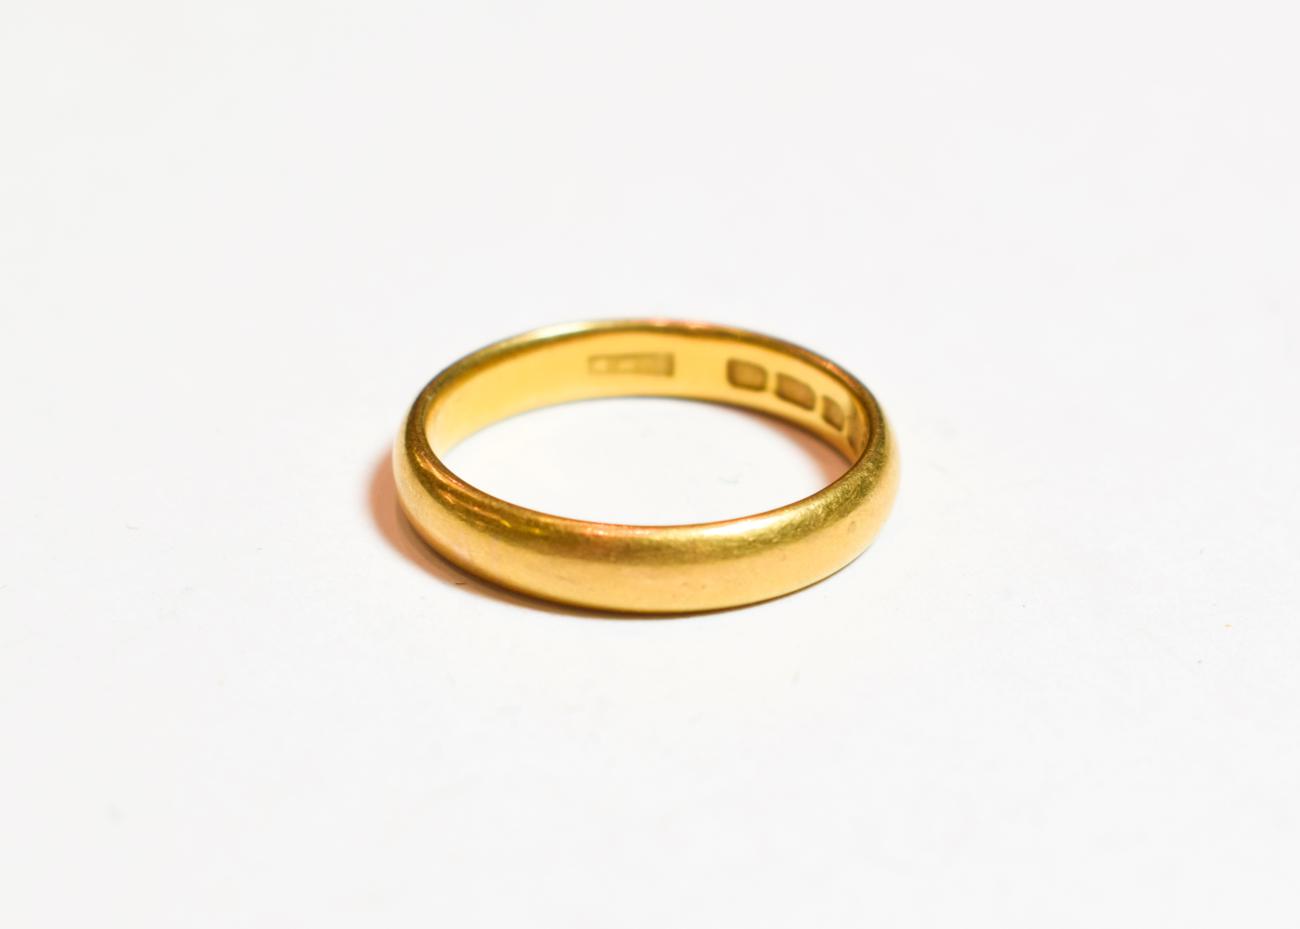 Lot 79 - A 22 carat gold band ring, finger size P1/2